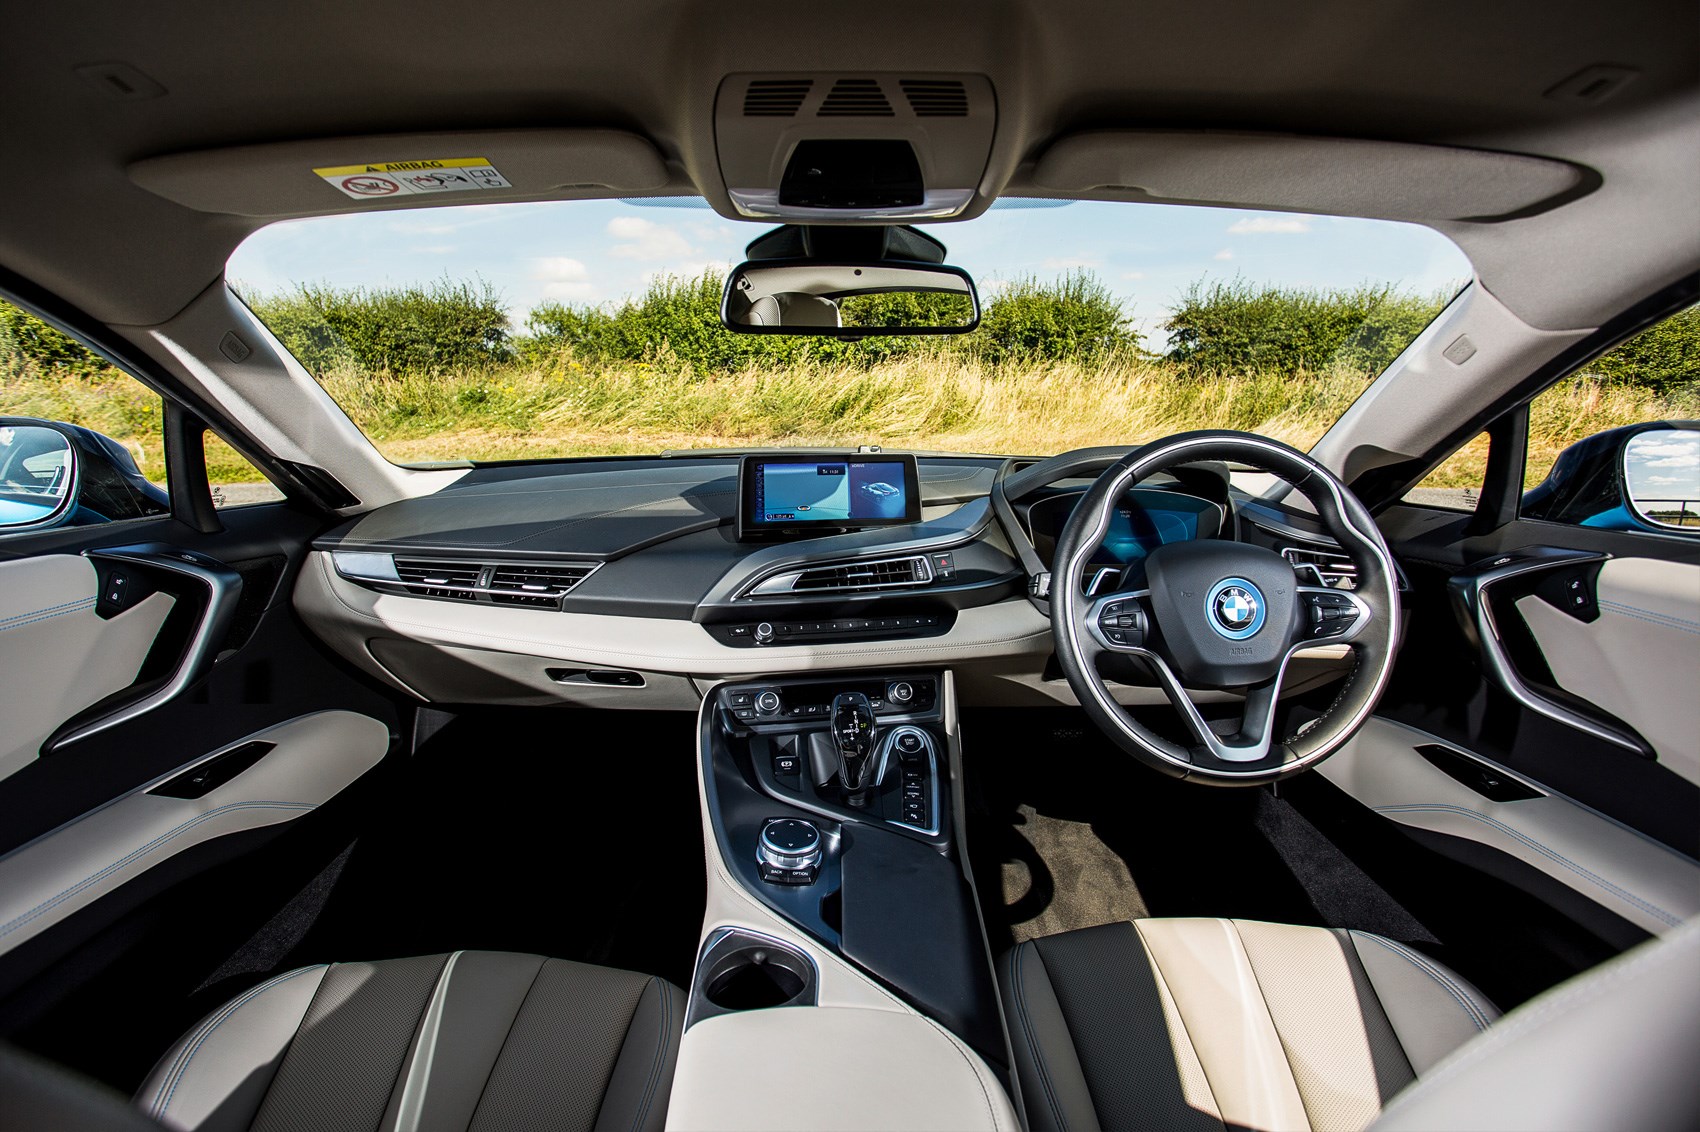 BMW I8: 5 Things I Learned Winter Driving a Hybrid Supercar